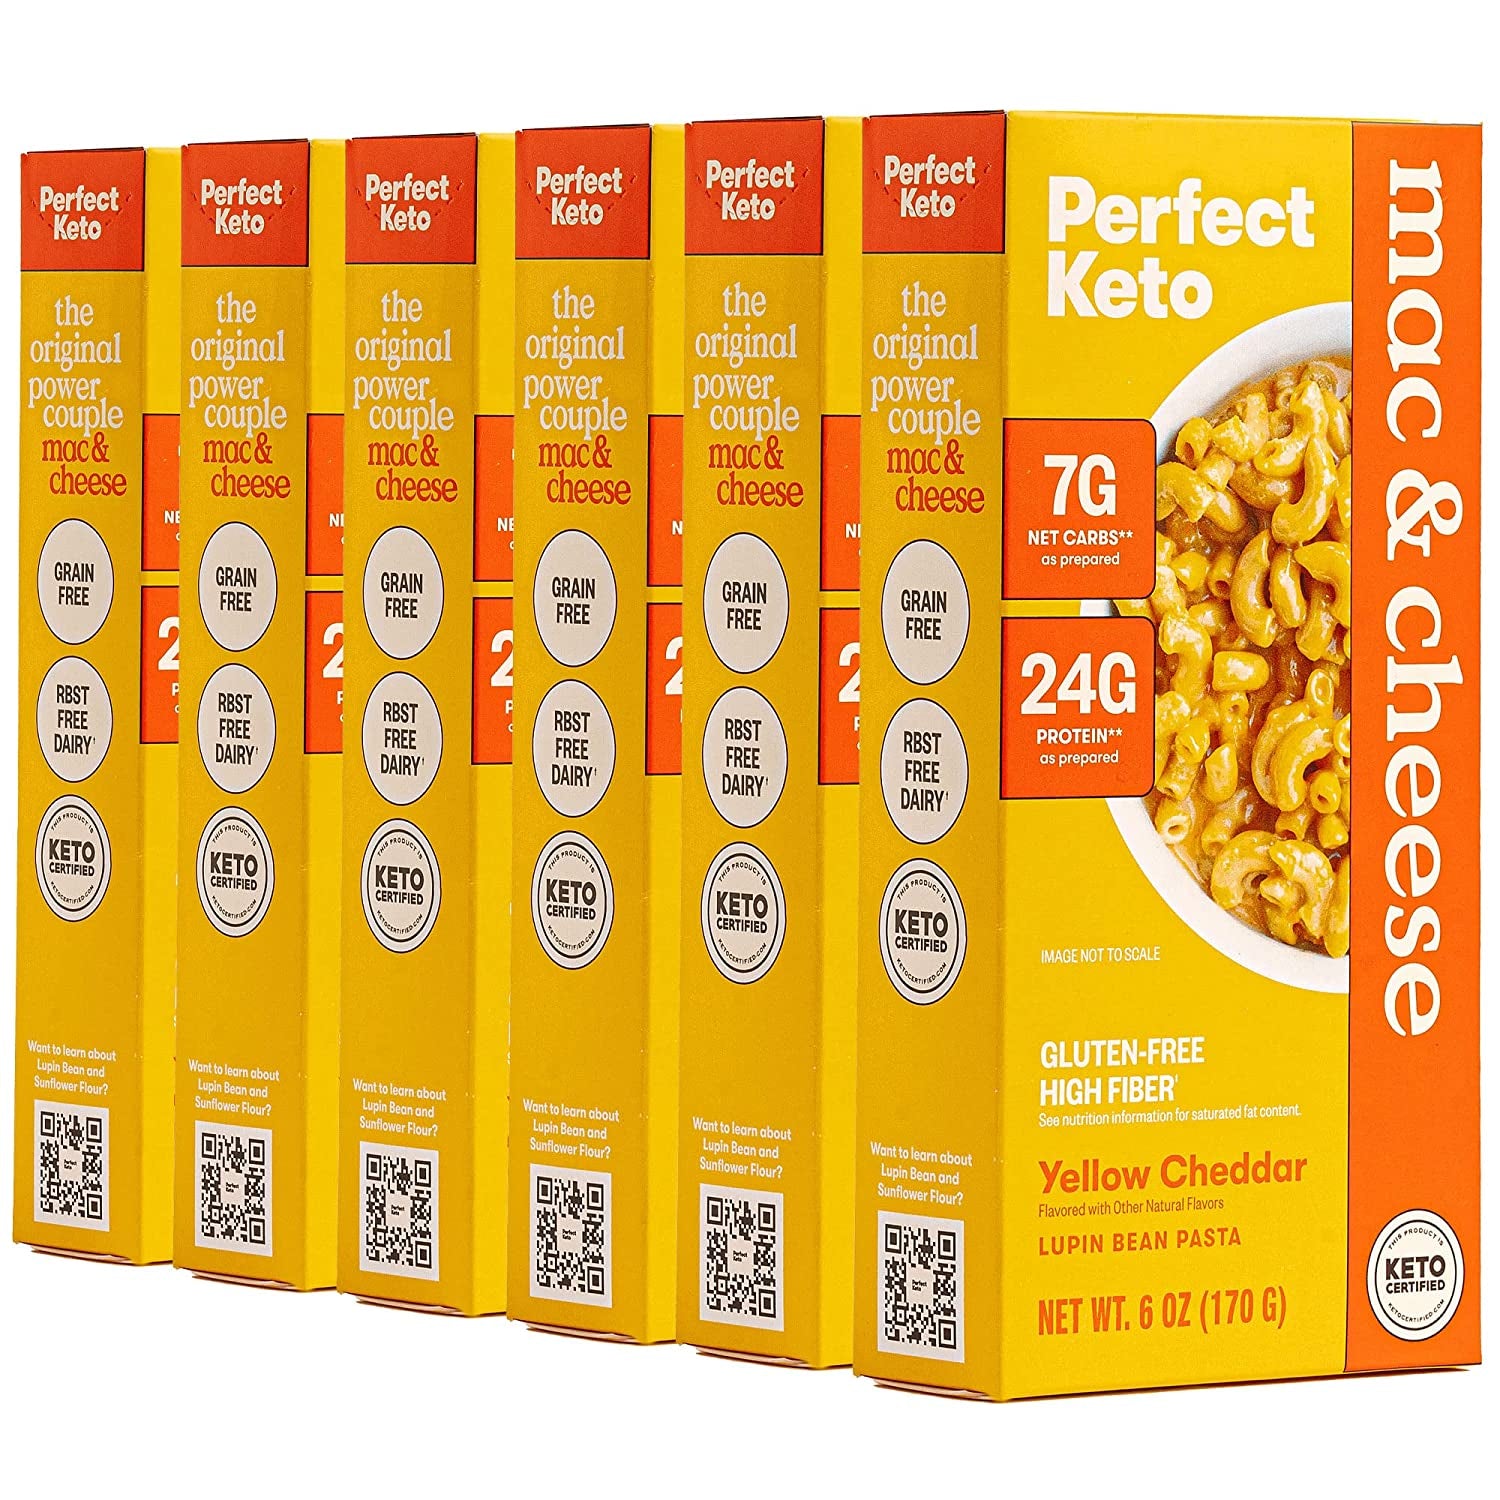 Keto Macaroni and Cheese, Gluten-Free Low Carb Pasta- 6 Pack 